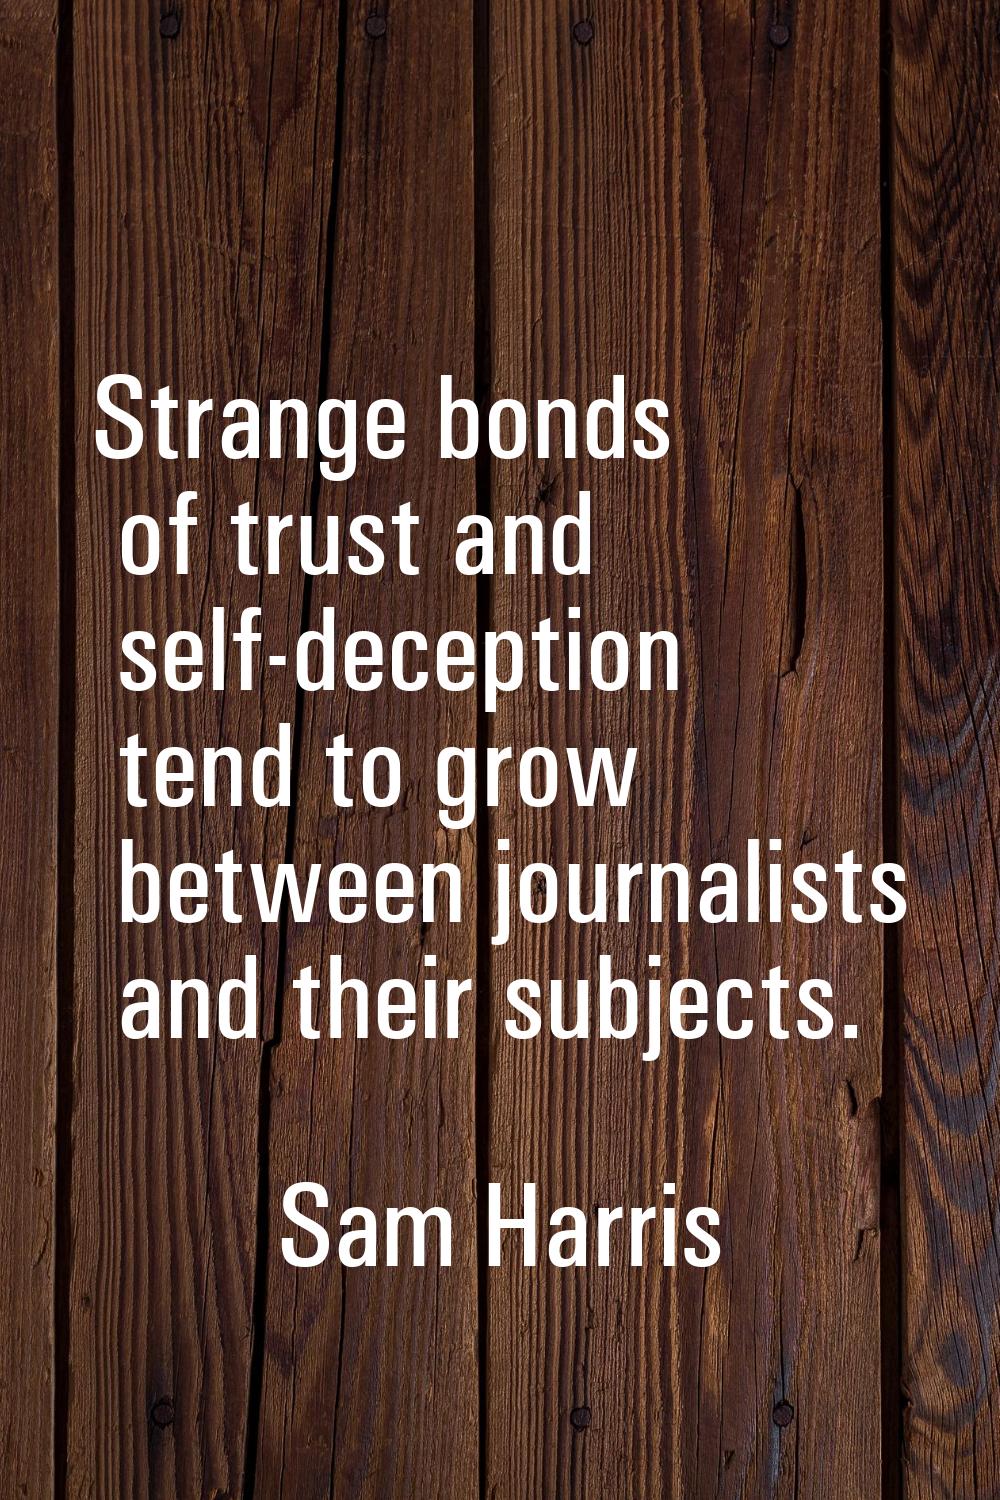 Strange bonds of trust and self-deception tend to grow between journalists and their subjects.